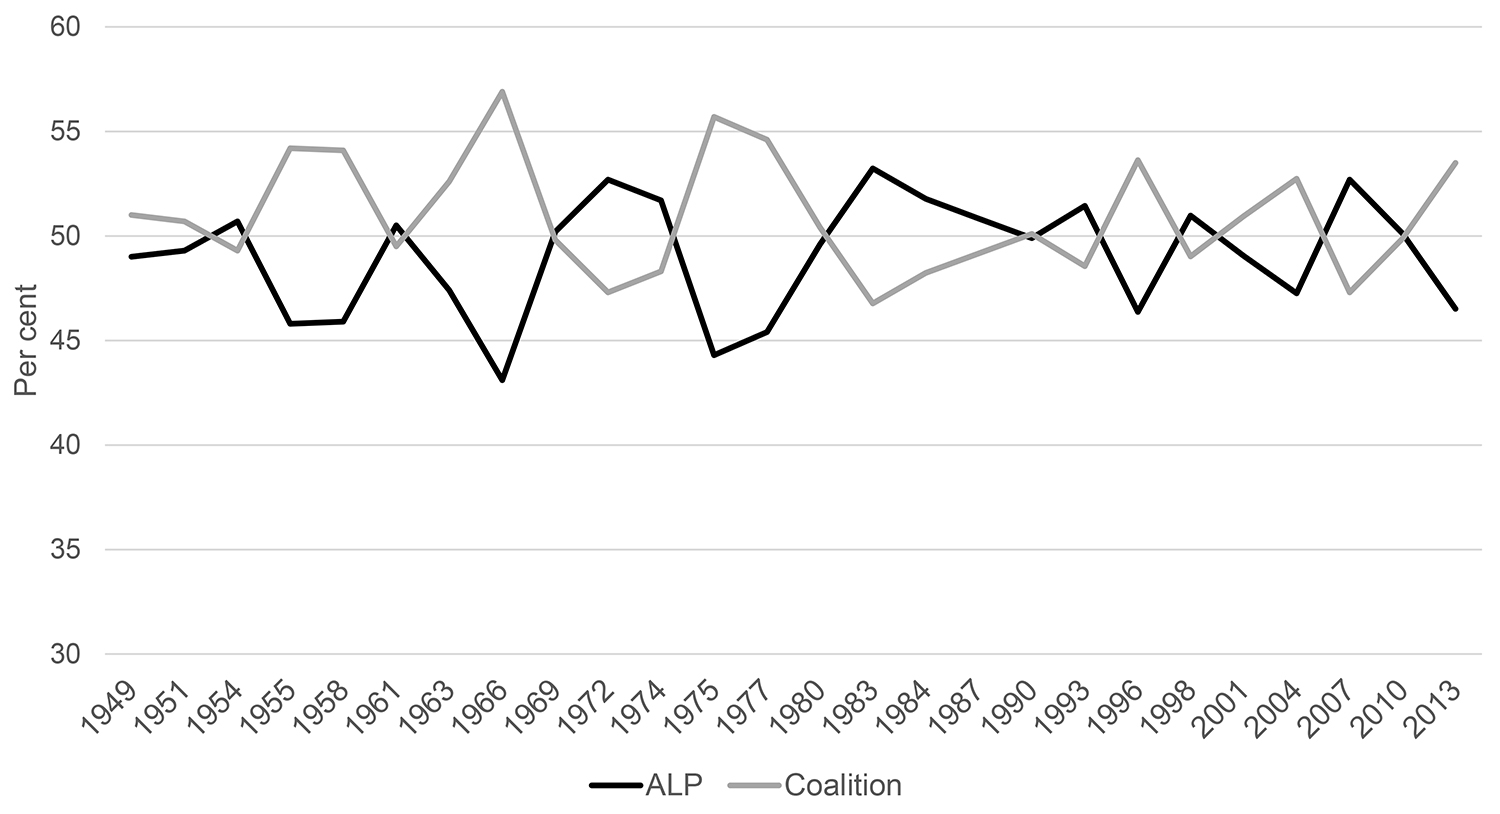 Line graph showing ‘two-party preferred’ election results for the Australian House of Representatives between 1949 and 2013.